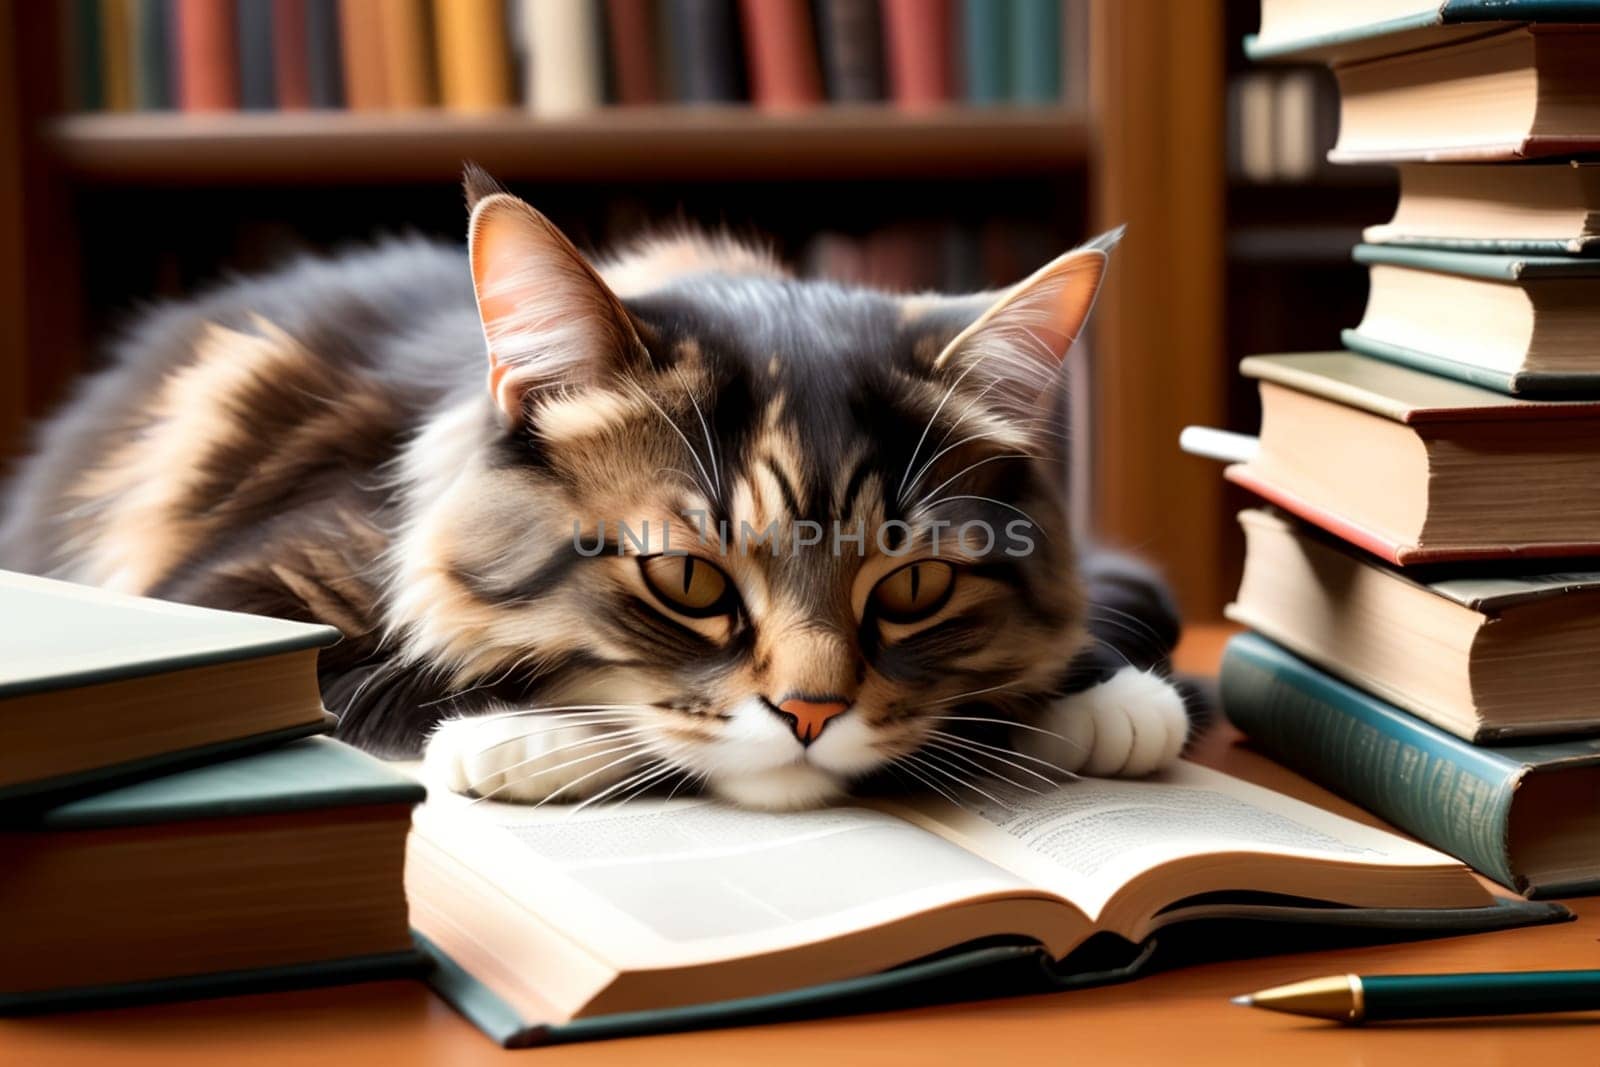 the cat lies on a book in the library, shelves with books in the background.